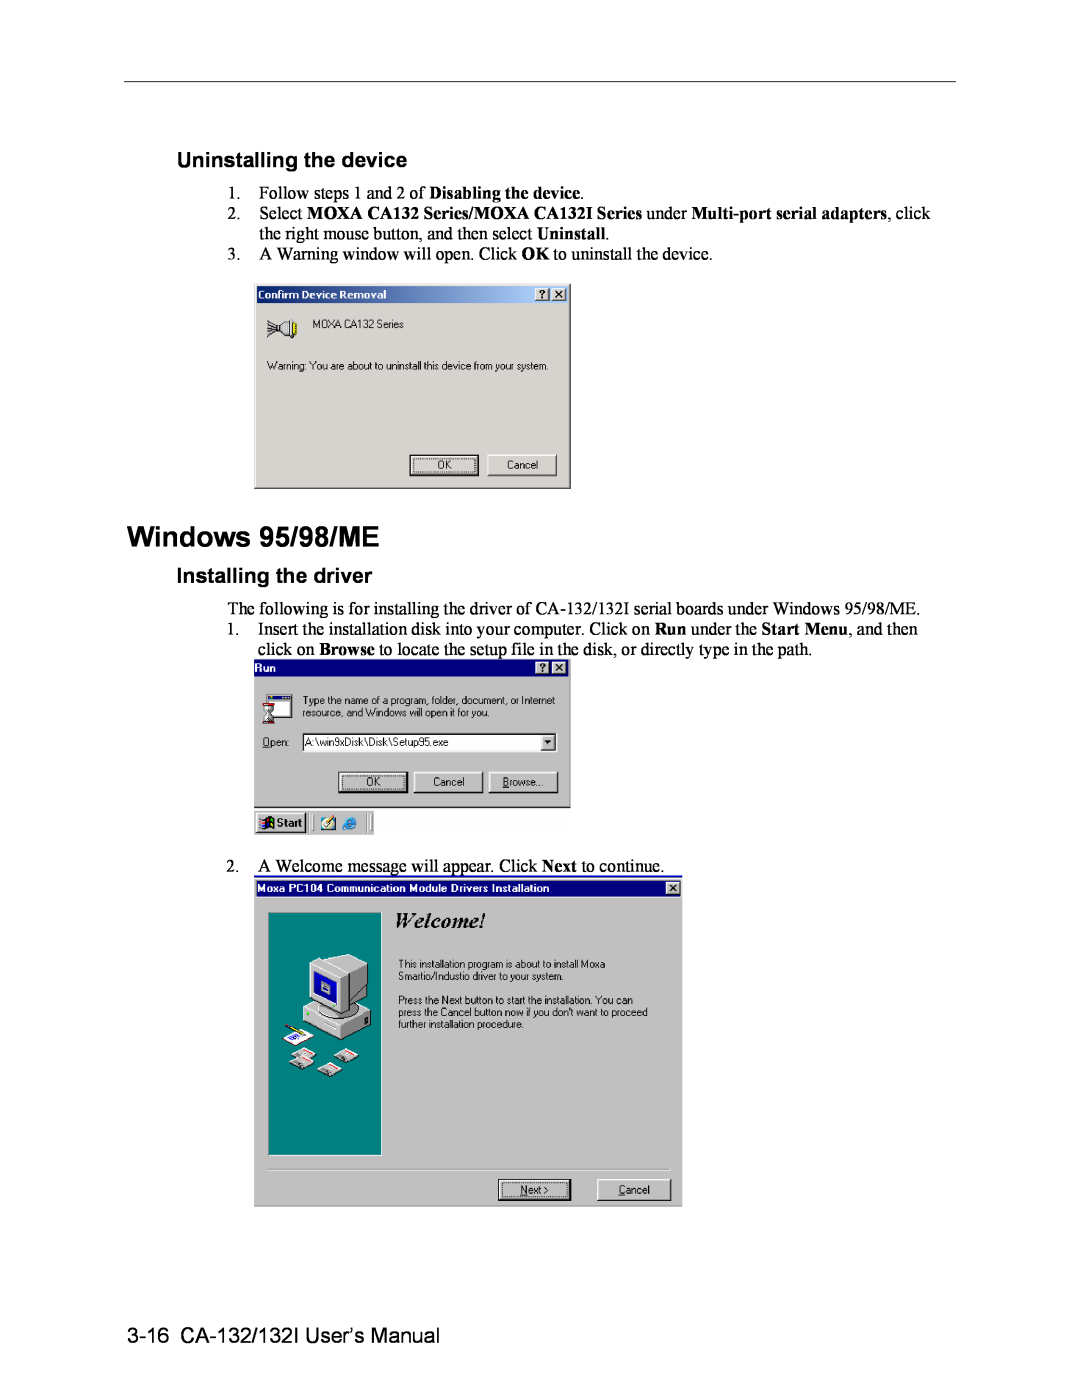 Moxa Technologies Windows 95/98/ME, Uninstalling the device, 3-16 CA-132/132I User’s Manual, Installing the driver 